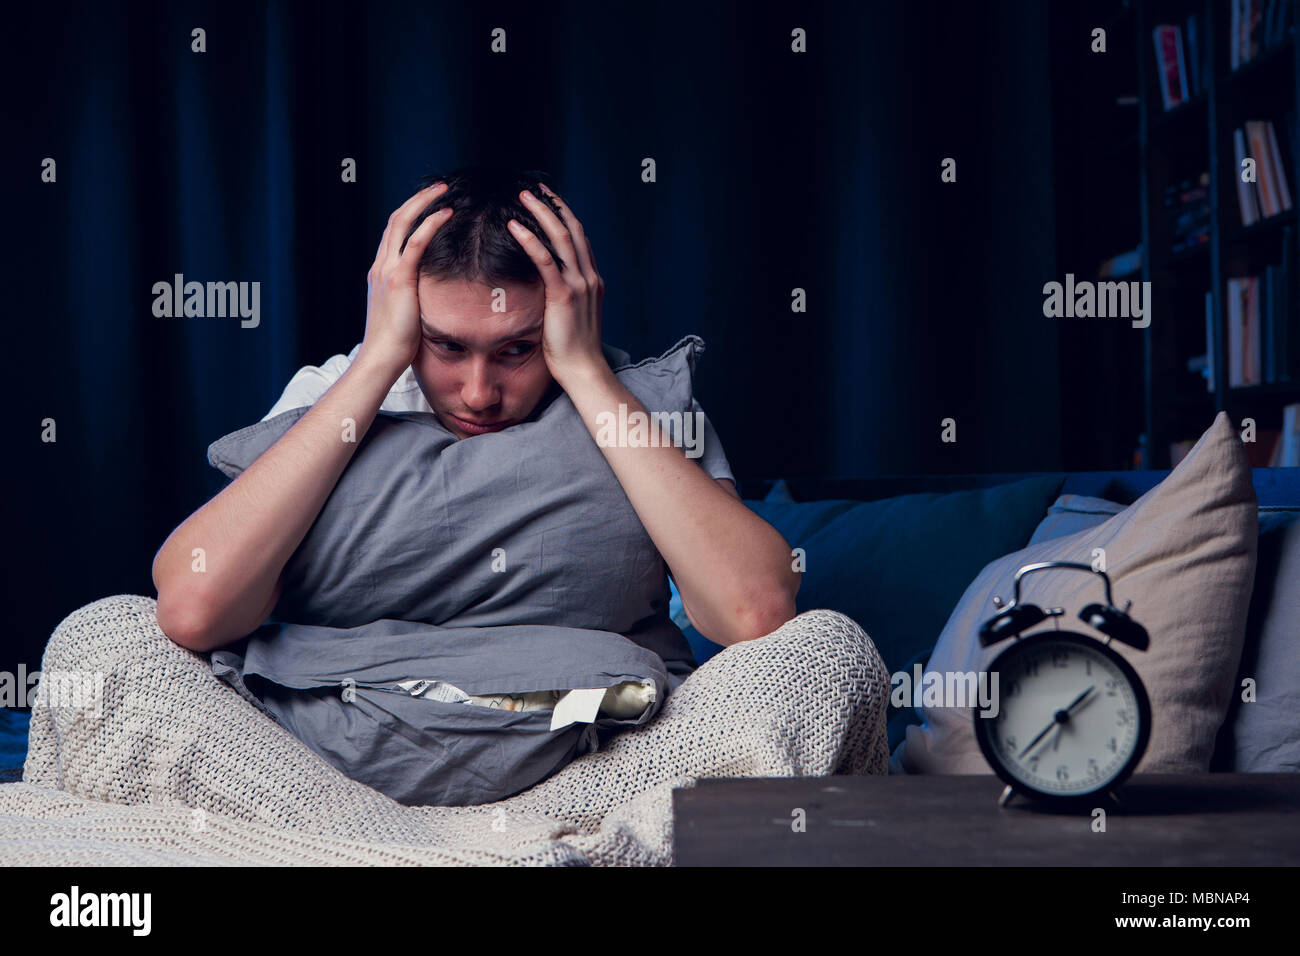 Image of man with insomnia with pillow sitting next to alarm Stock Photo